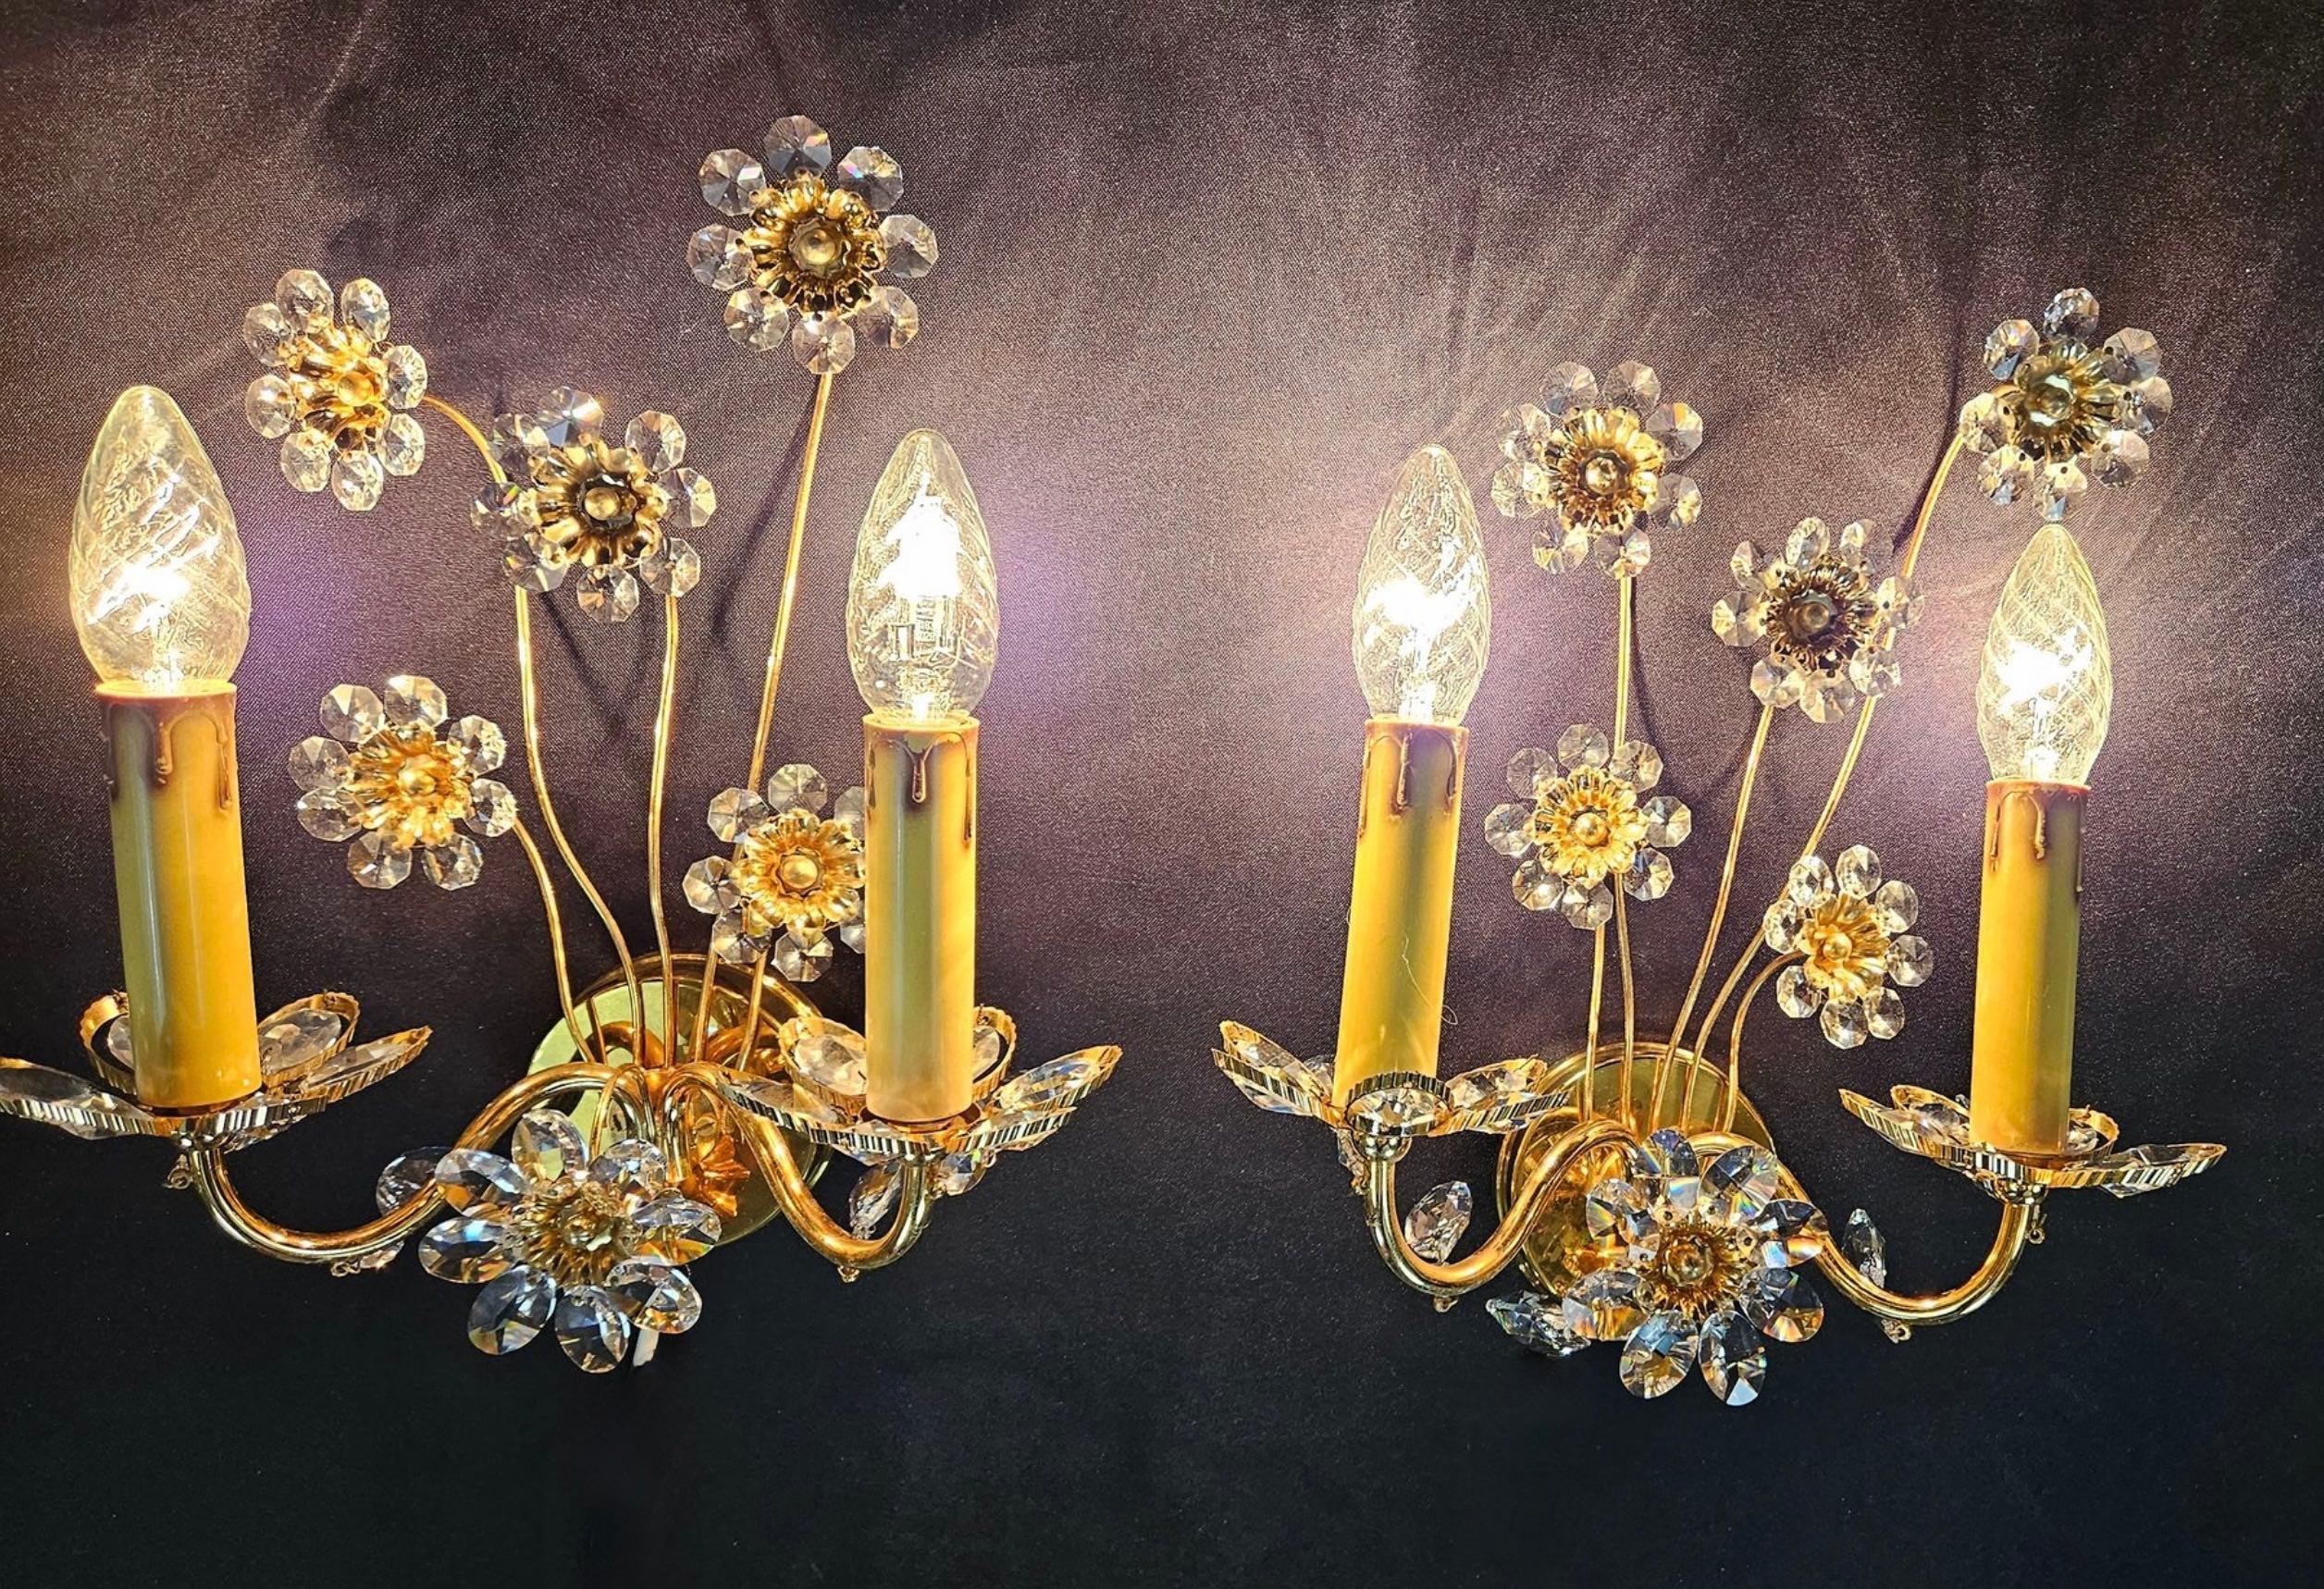 Pair of vintage gold-plated sconces with faceted crystal flowers made by the German company Palwa. Each fixture has two European style E14 socket. The Fixture requires two European E14 / 110 Volt Candelabra bulbs, each bulb up to 40 watts.